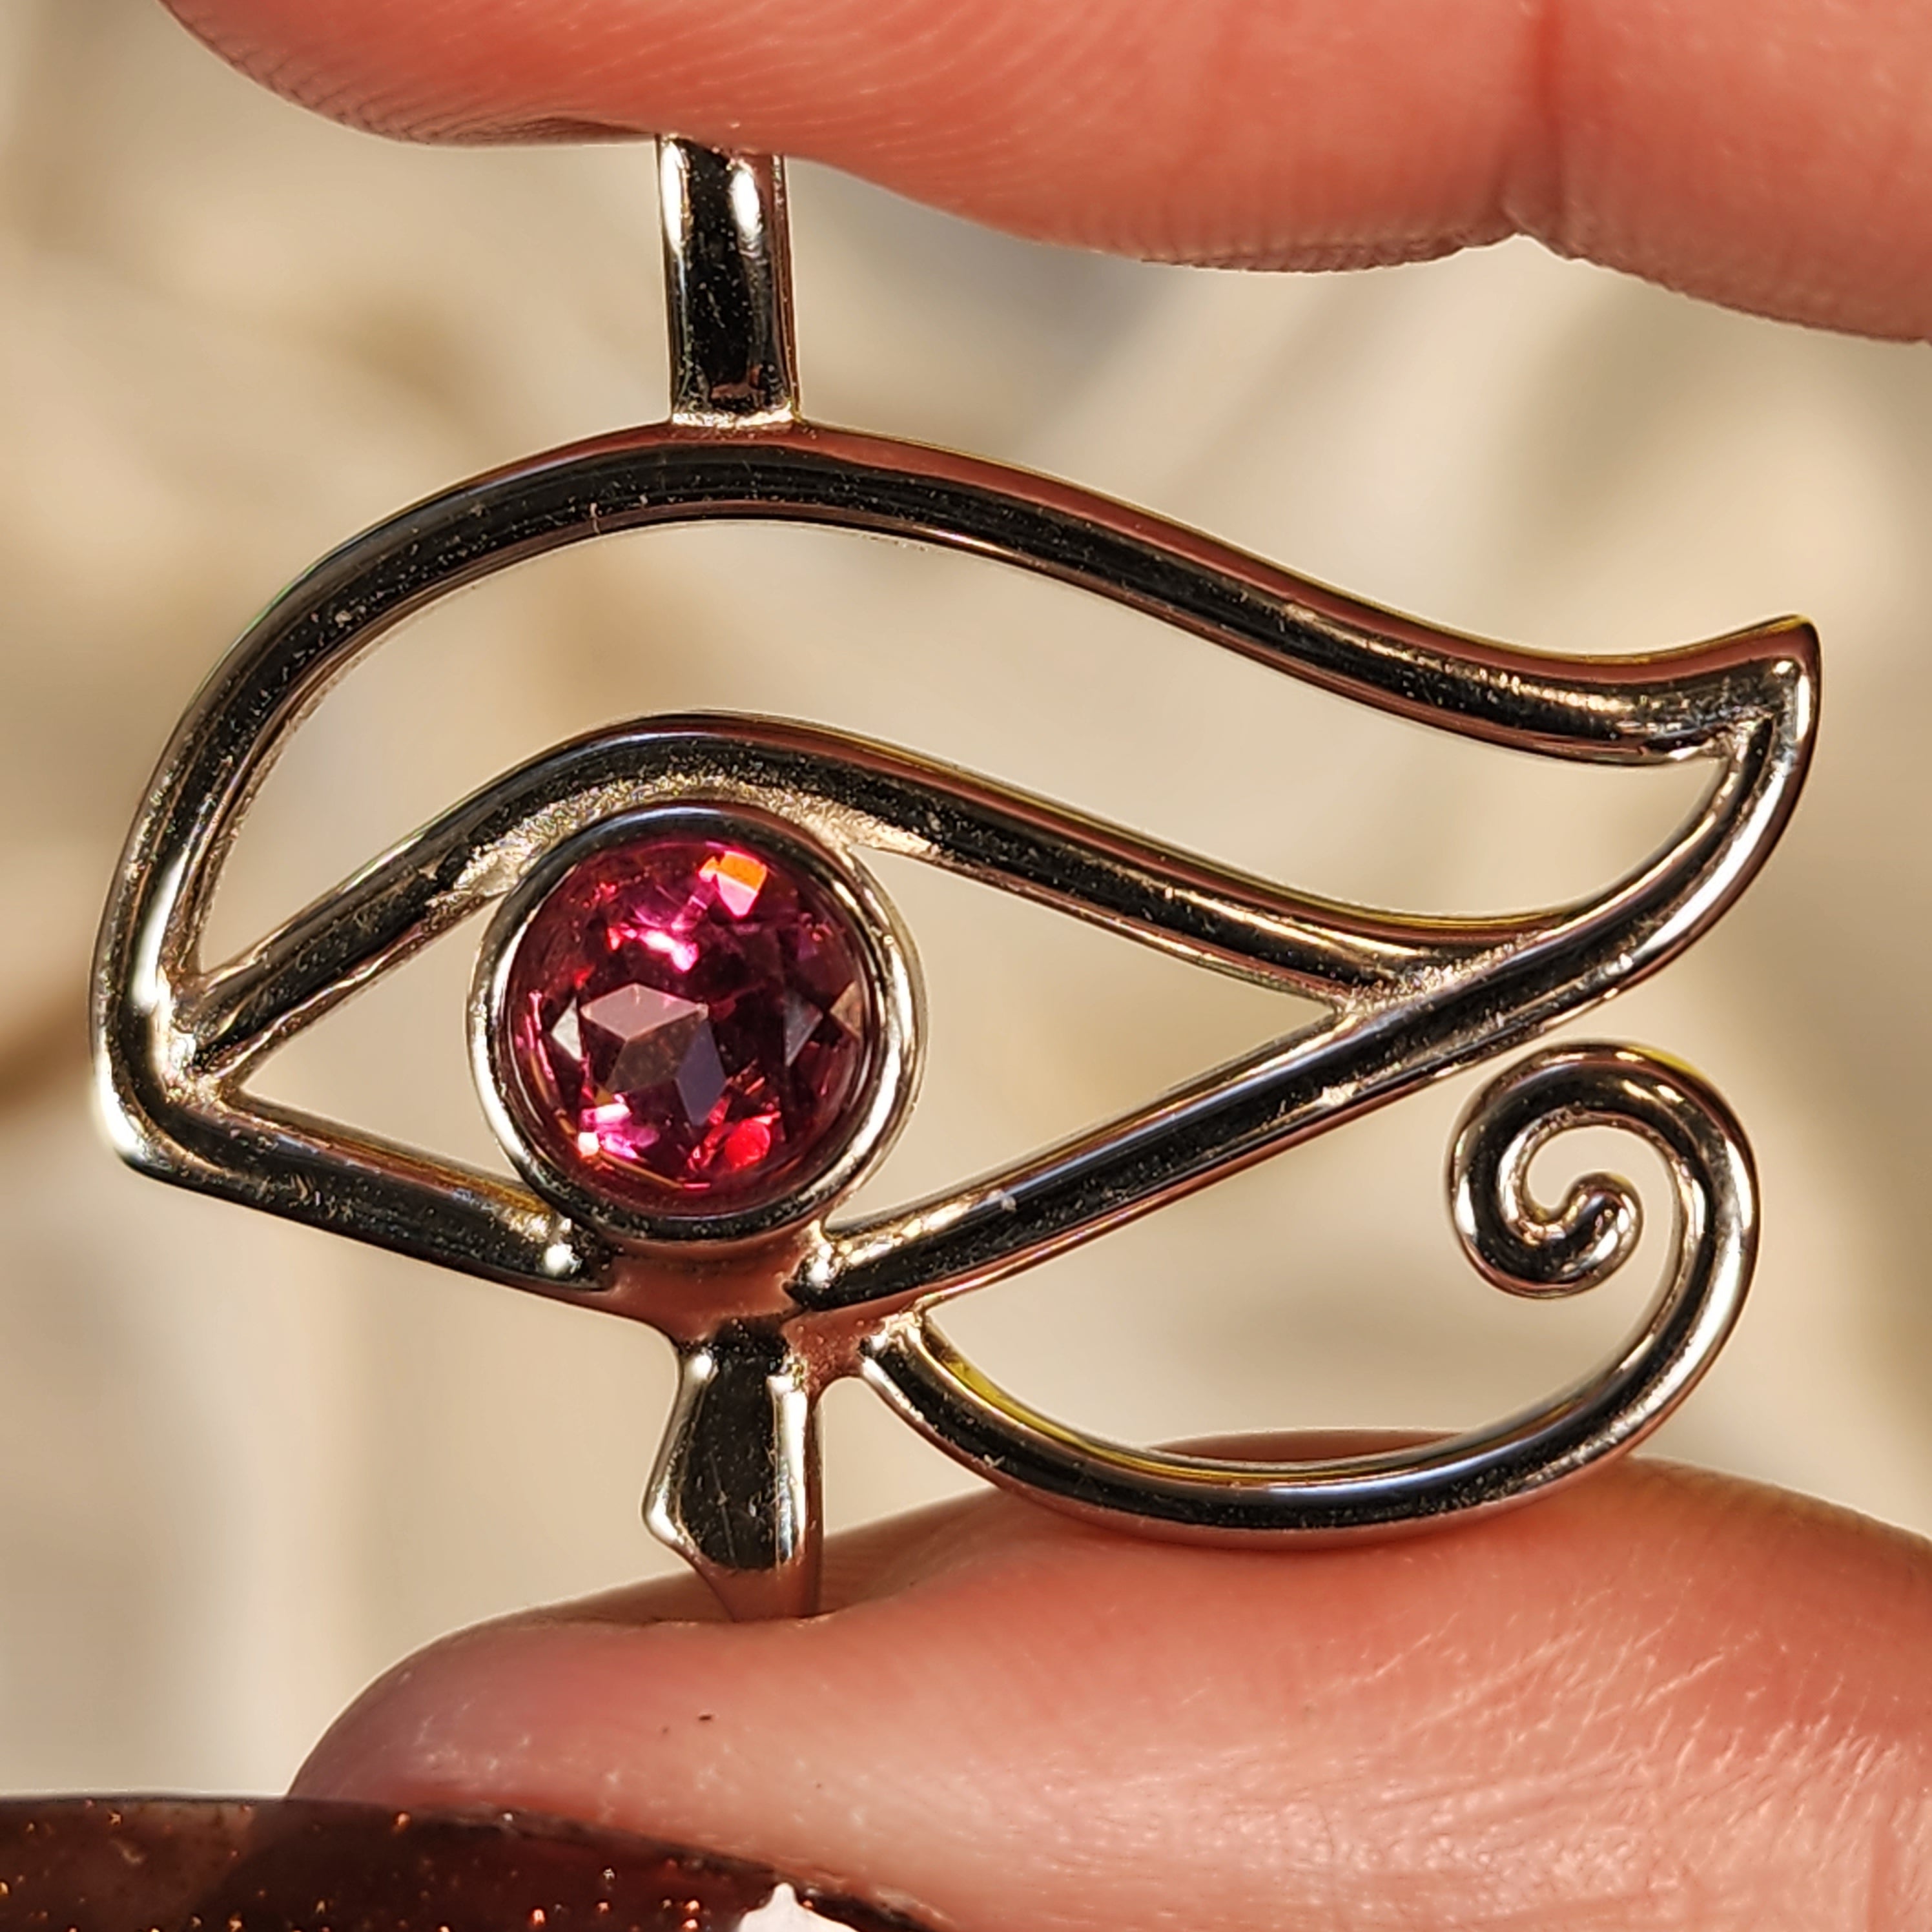 Pink Topaz Eye of Horus Amulet Pendant .925 Silver for Renewal, Healthy Relationships and Attracting Love